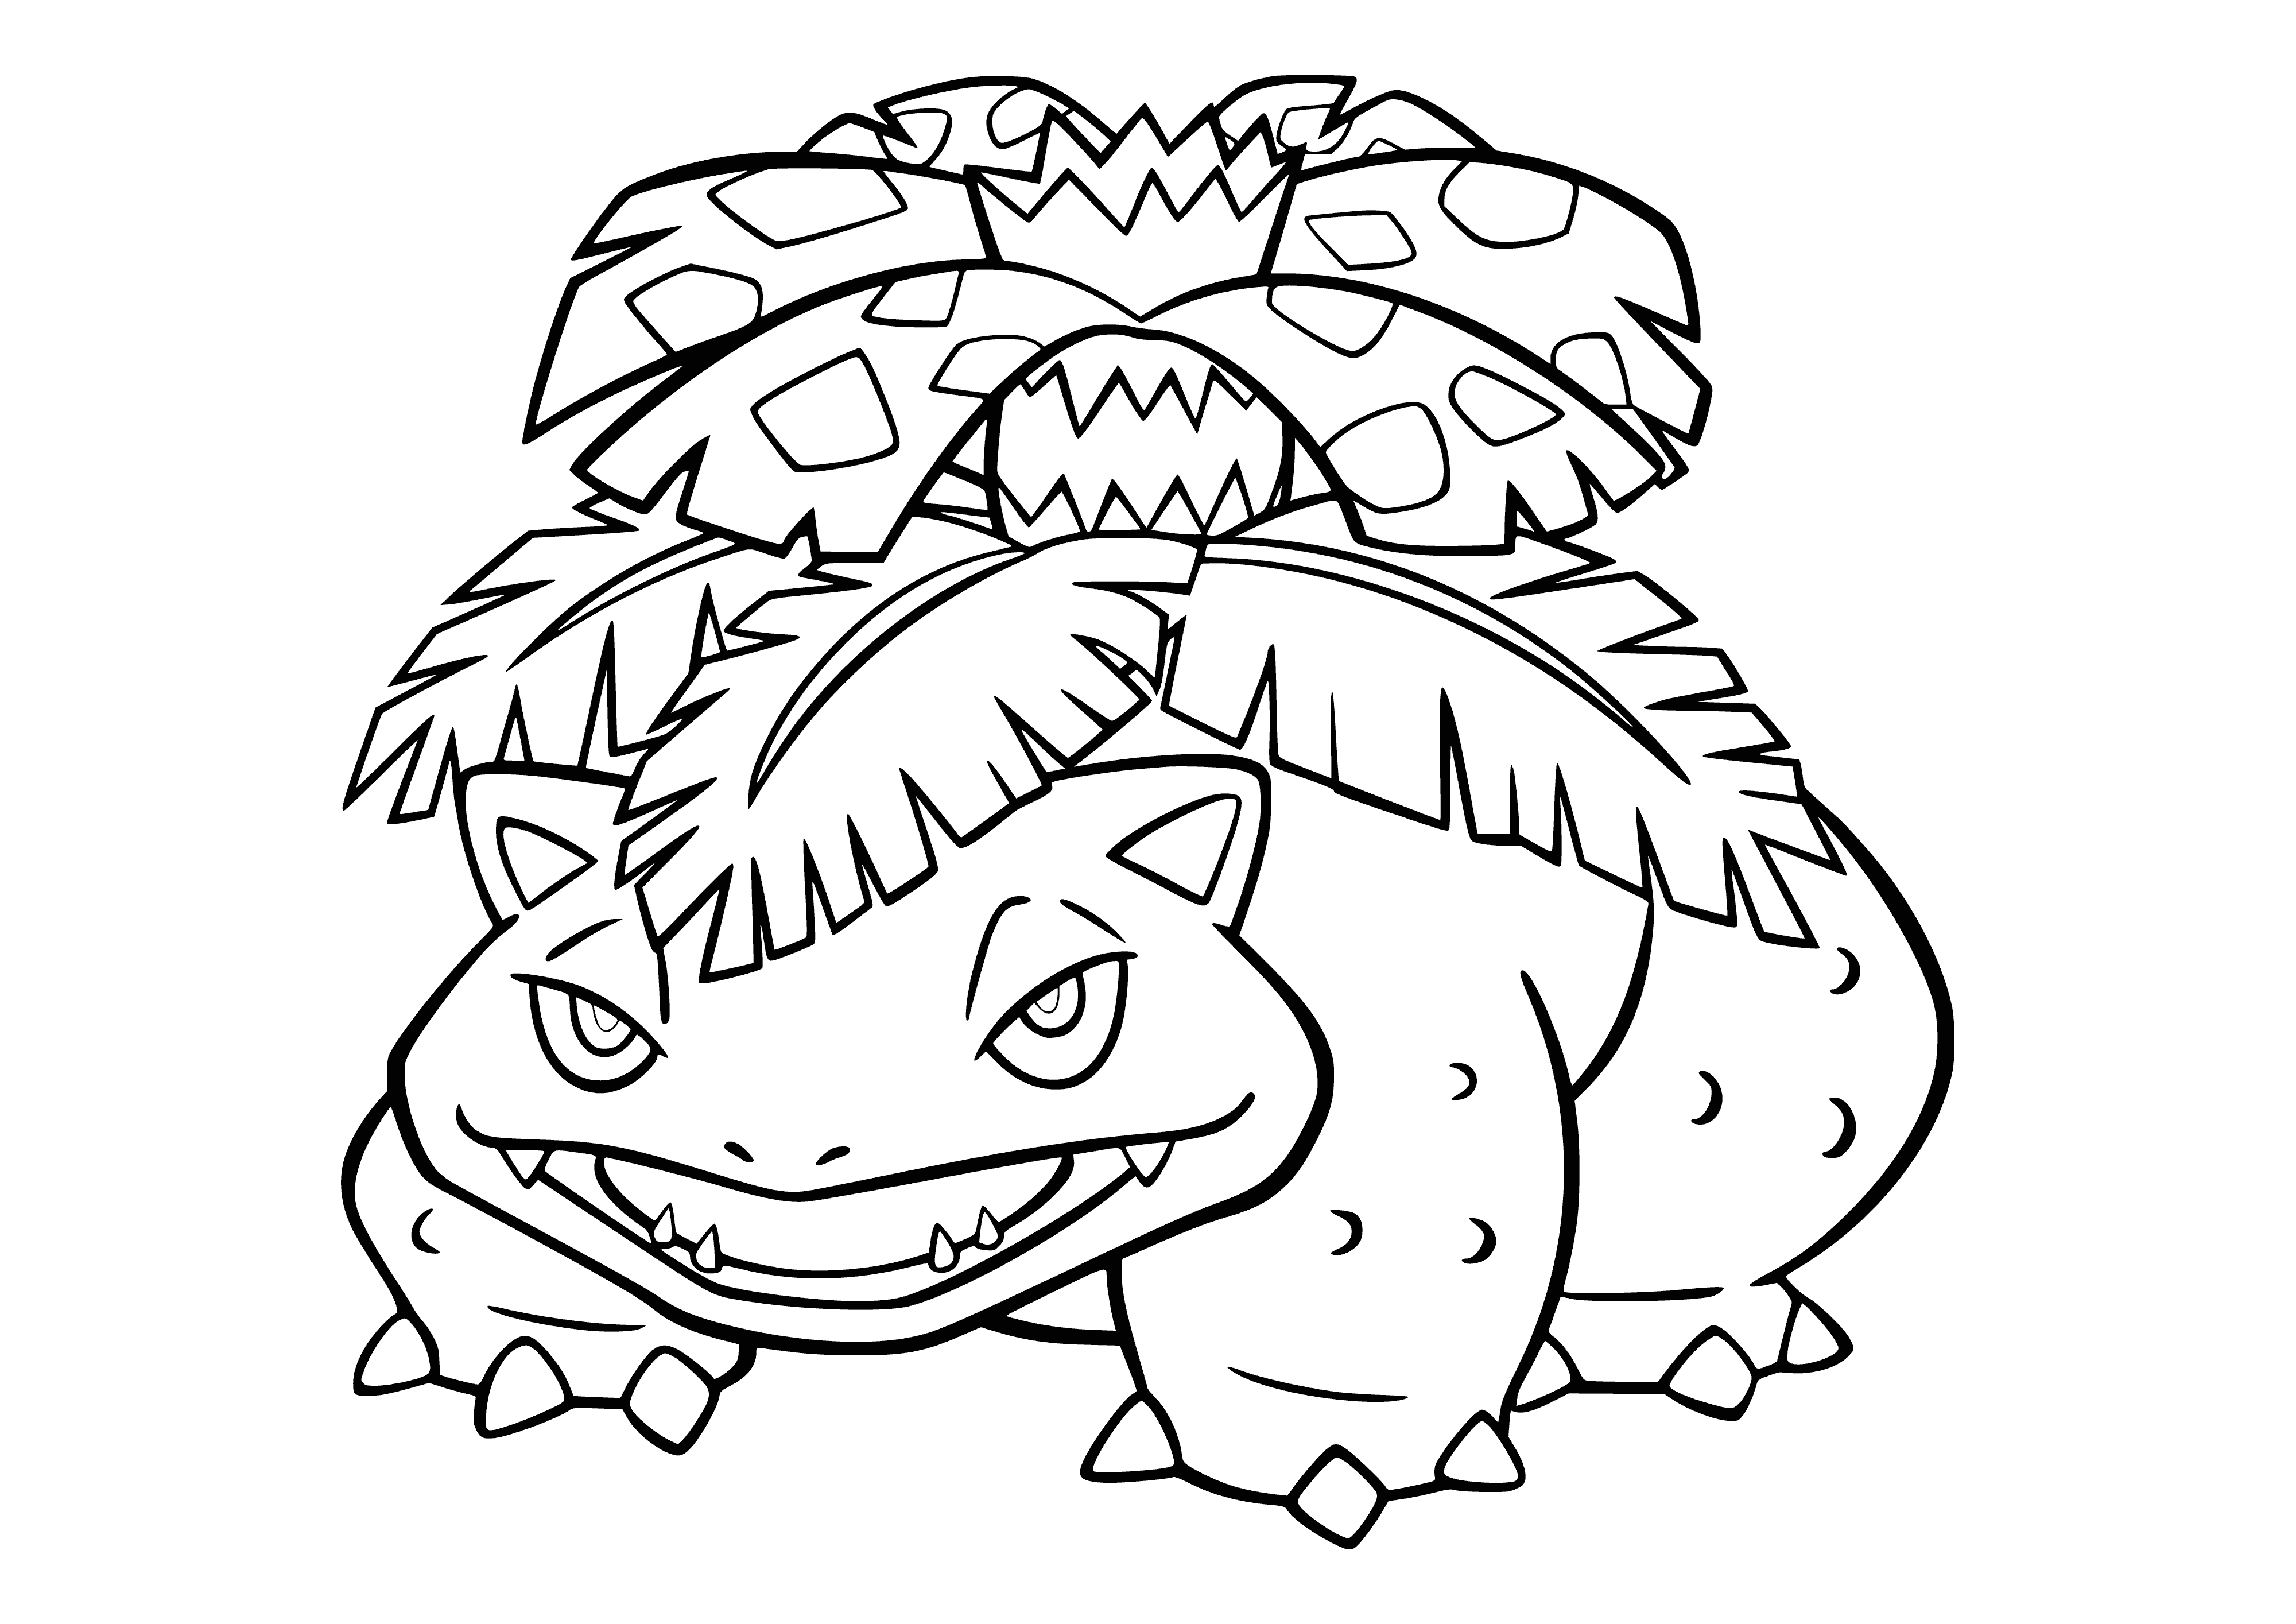 coloring page: Venusaur is a large green & yellow Pokemon with a flower on its back & a long tail; evolves from Ivysaur & can Mega-evolve.